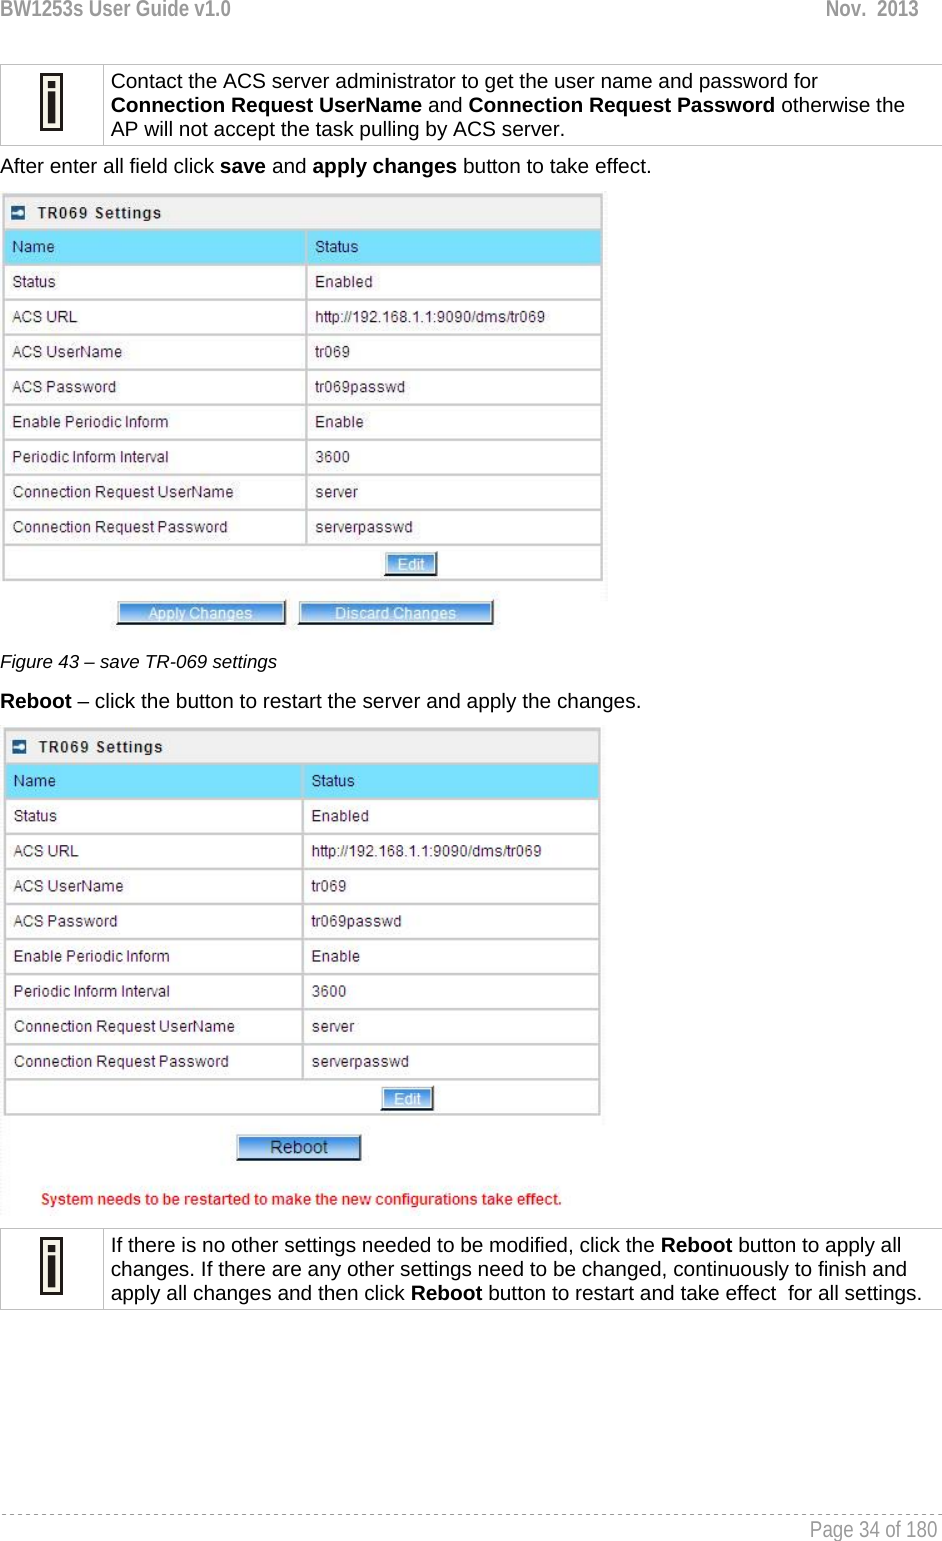 BW1253s User Guide v1.0  Nov.  2013     Page 34 of 180    Contact the ACS server administrator to get the user name and password for Connection Request UserName and Connection Request Password otherwise the AP will not accept the task pulling by ACS server. After enter all field click save and apply changes button to take effect.  Figure 43 – save TR-069 settings Reboot – click the button to restart the server and apply the changes.   If there is no other settings needed to be modified, click the Reboot button to apply all changes. If there are any other settings need to be changed, continuously to finish and apply all changes and then click Reboot button to restart and take effect  for all settings.  